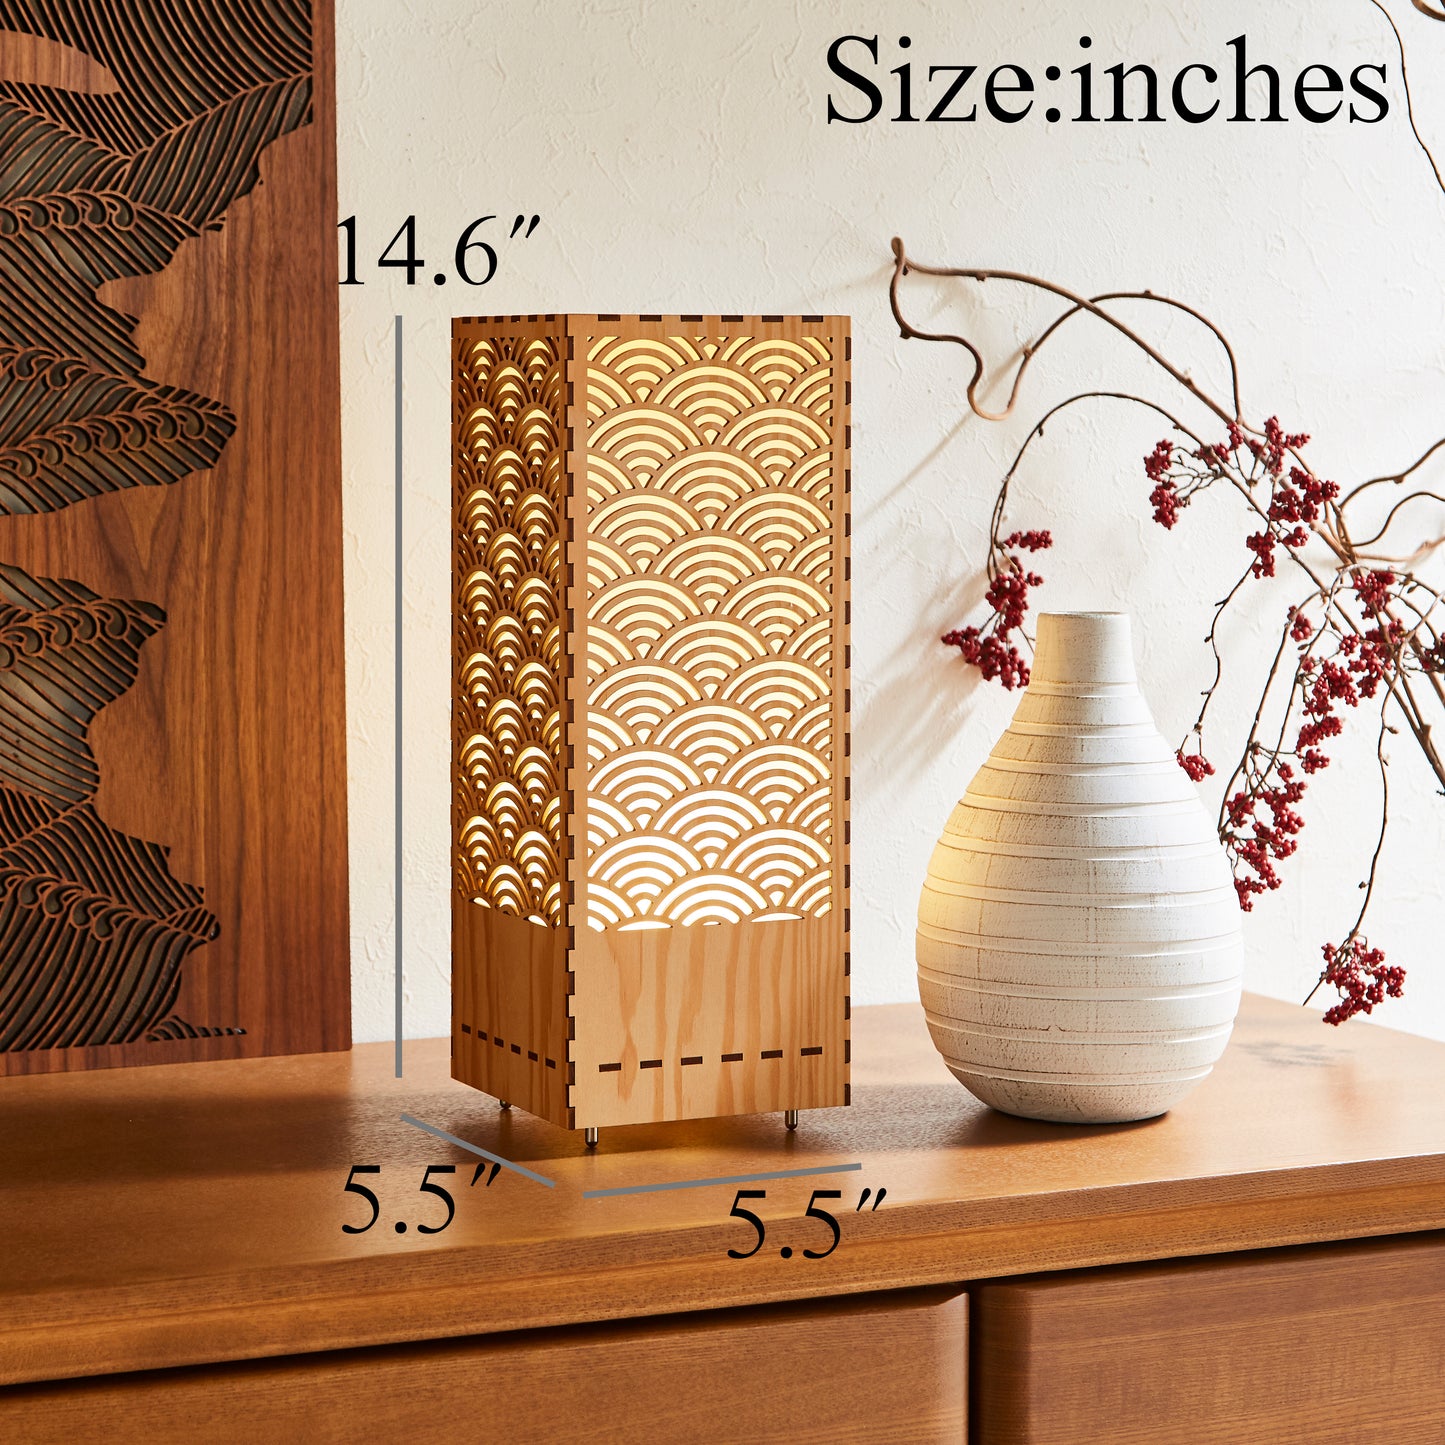 Japanese Room Lantern Harmonious decorative light with Japanese traditional Seigaiha pattern for bedroom, living room and Japanese-style room.